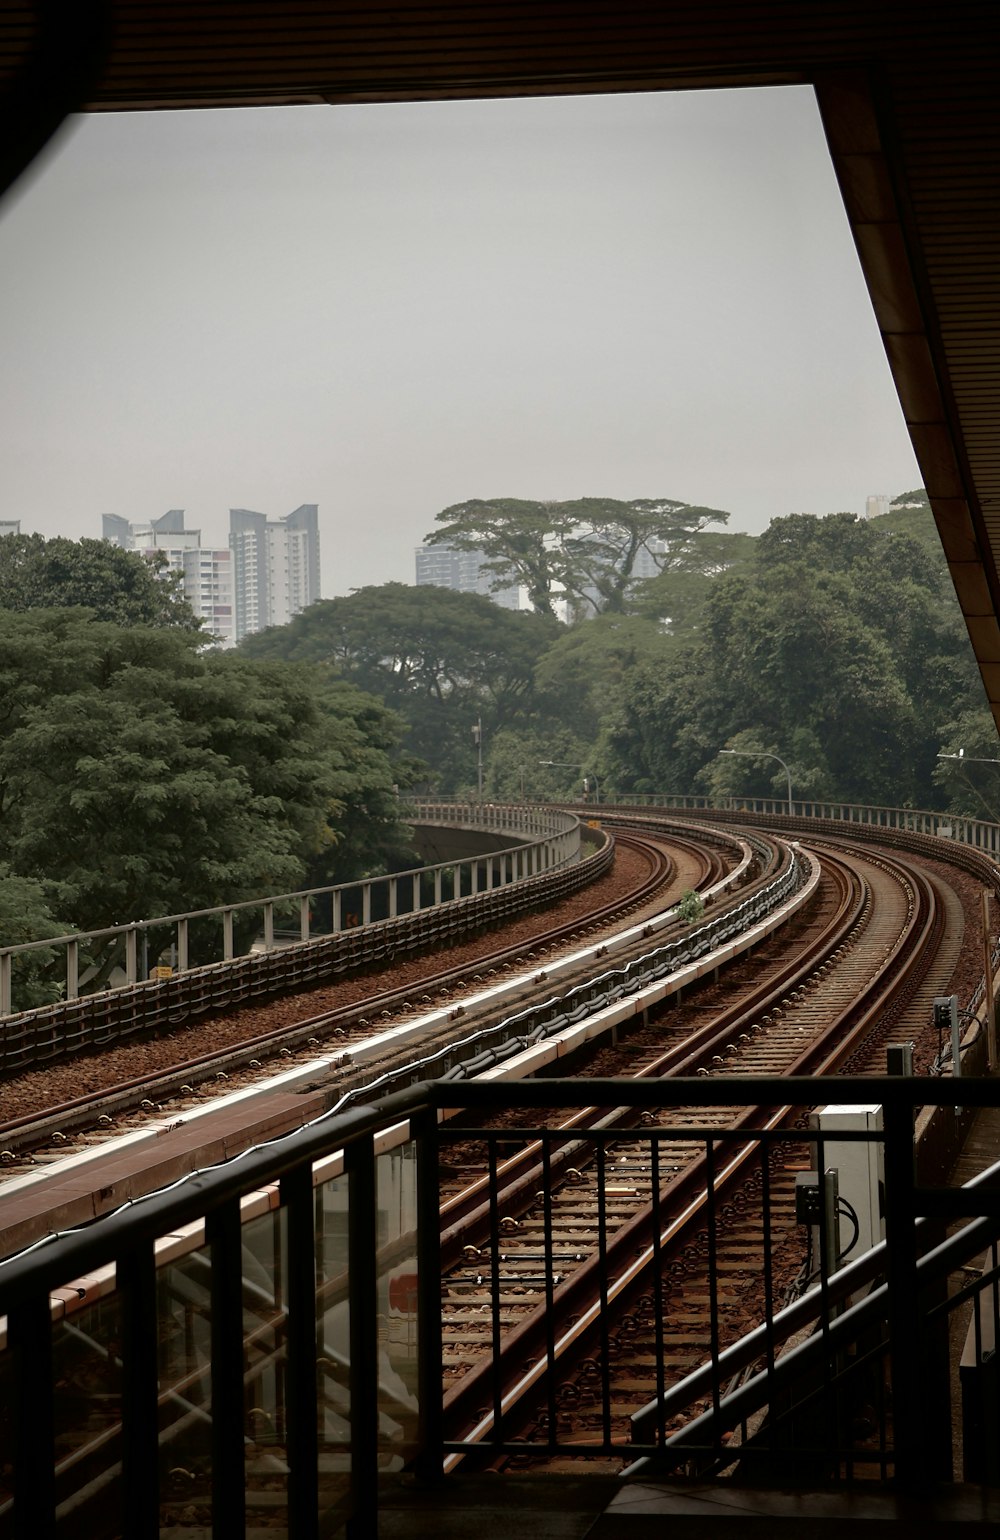 a view of a train track from a platform